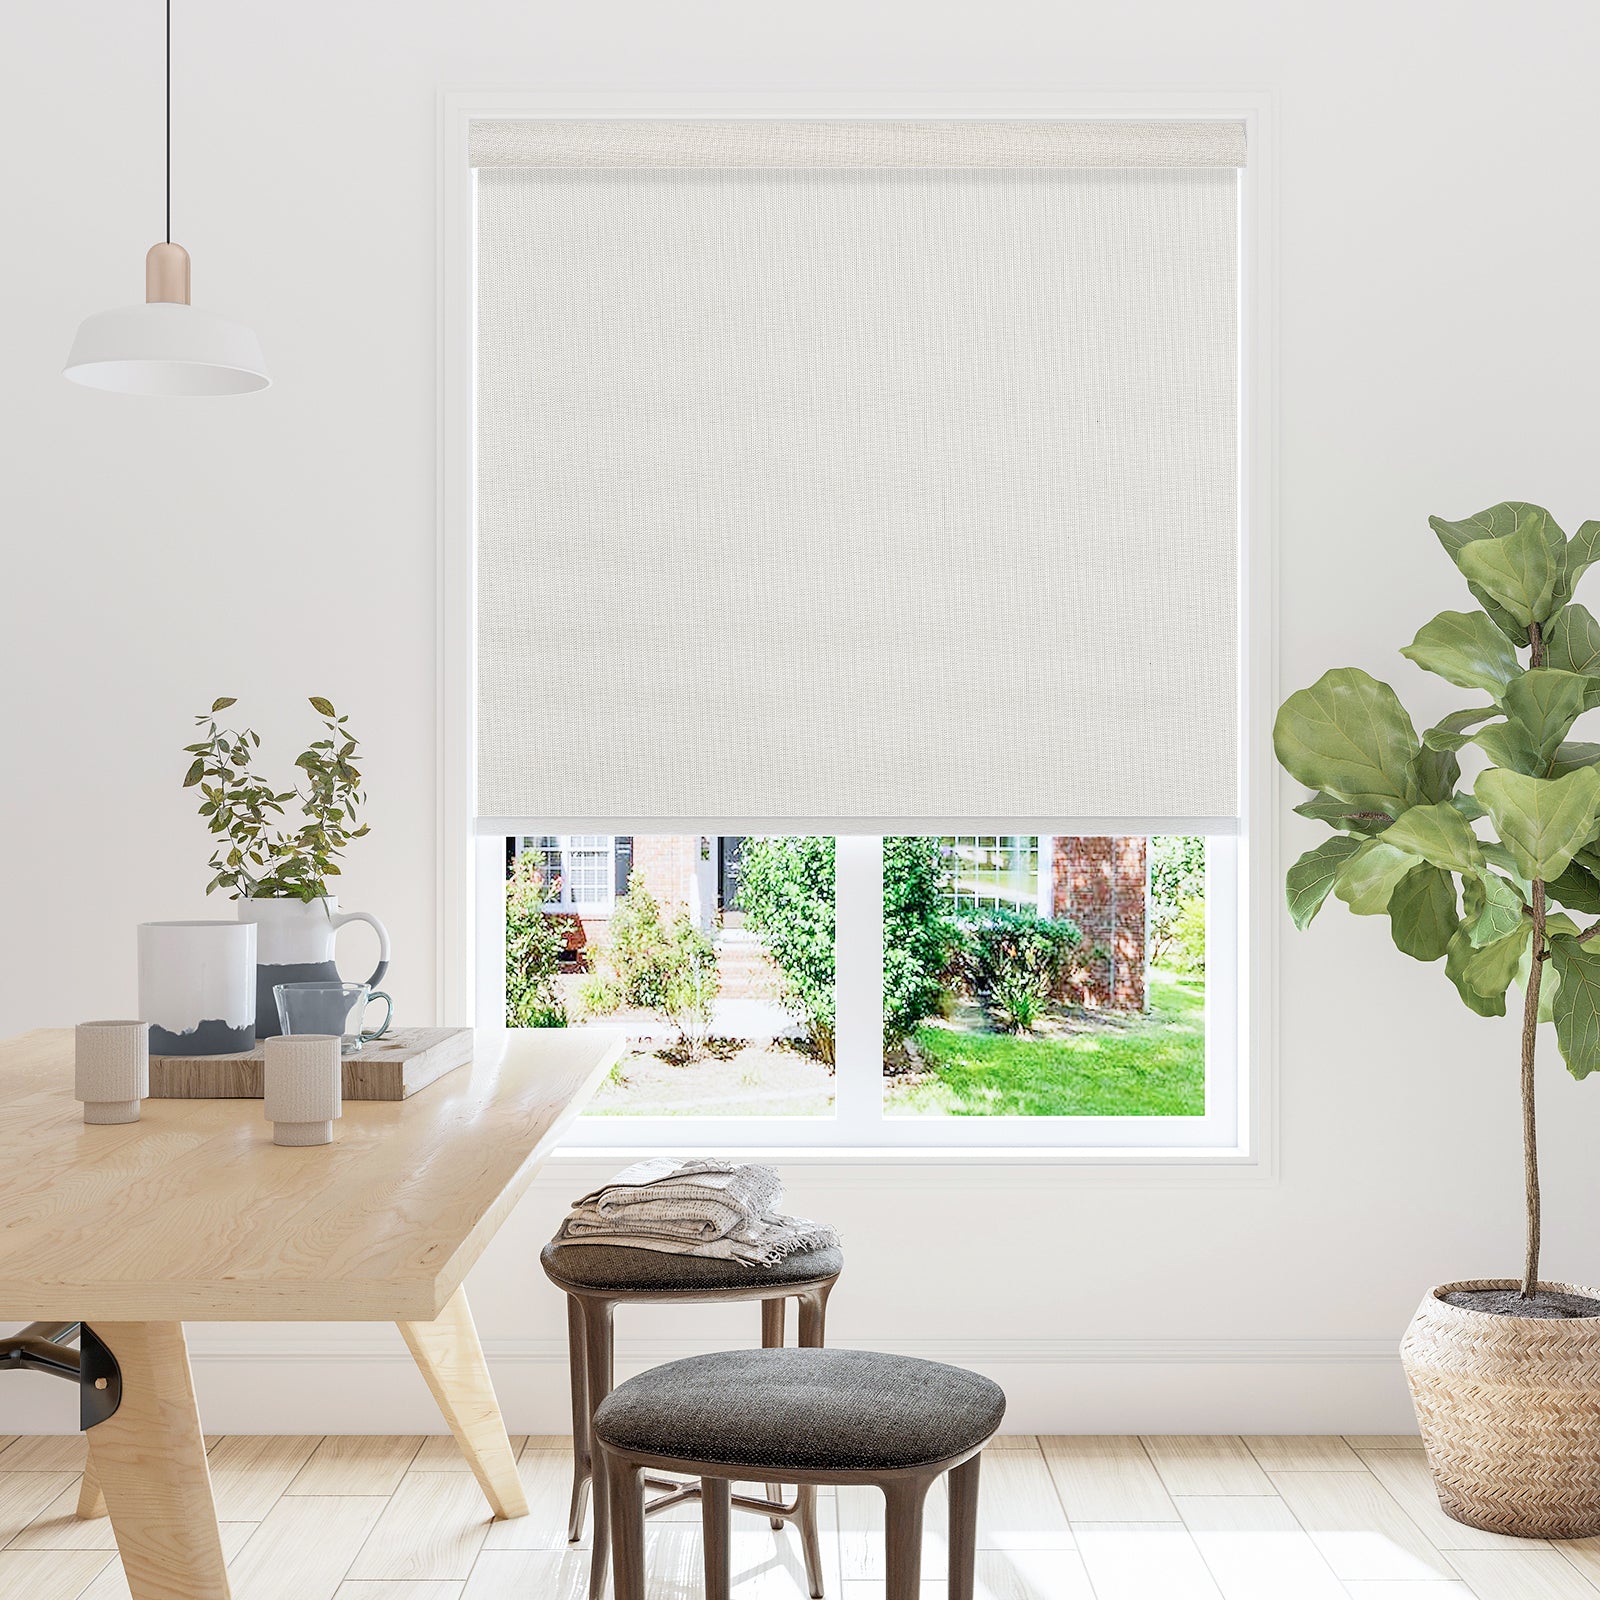 Keego Premium Motorized Roller Shades with Metal Valance - Jacquard Series